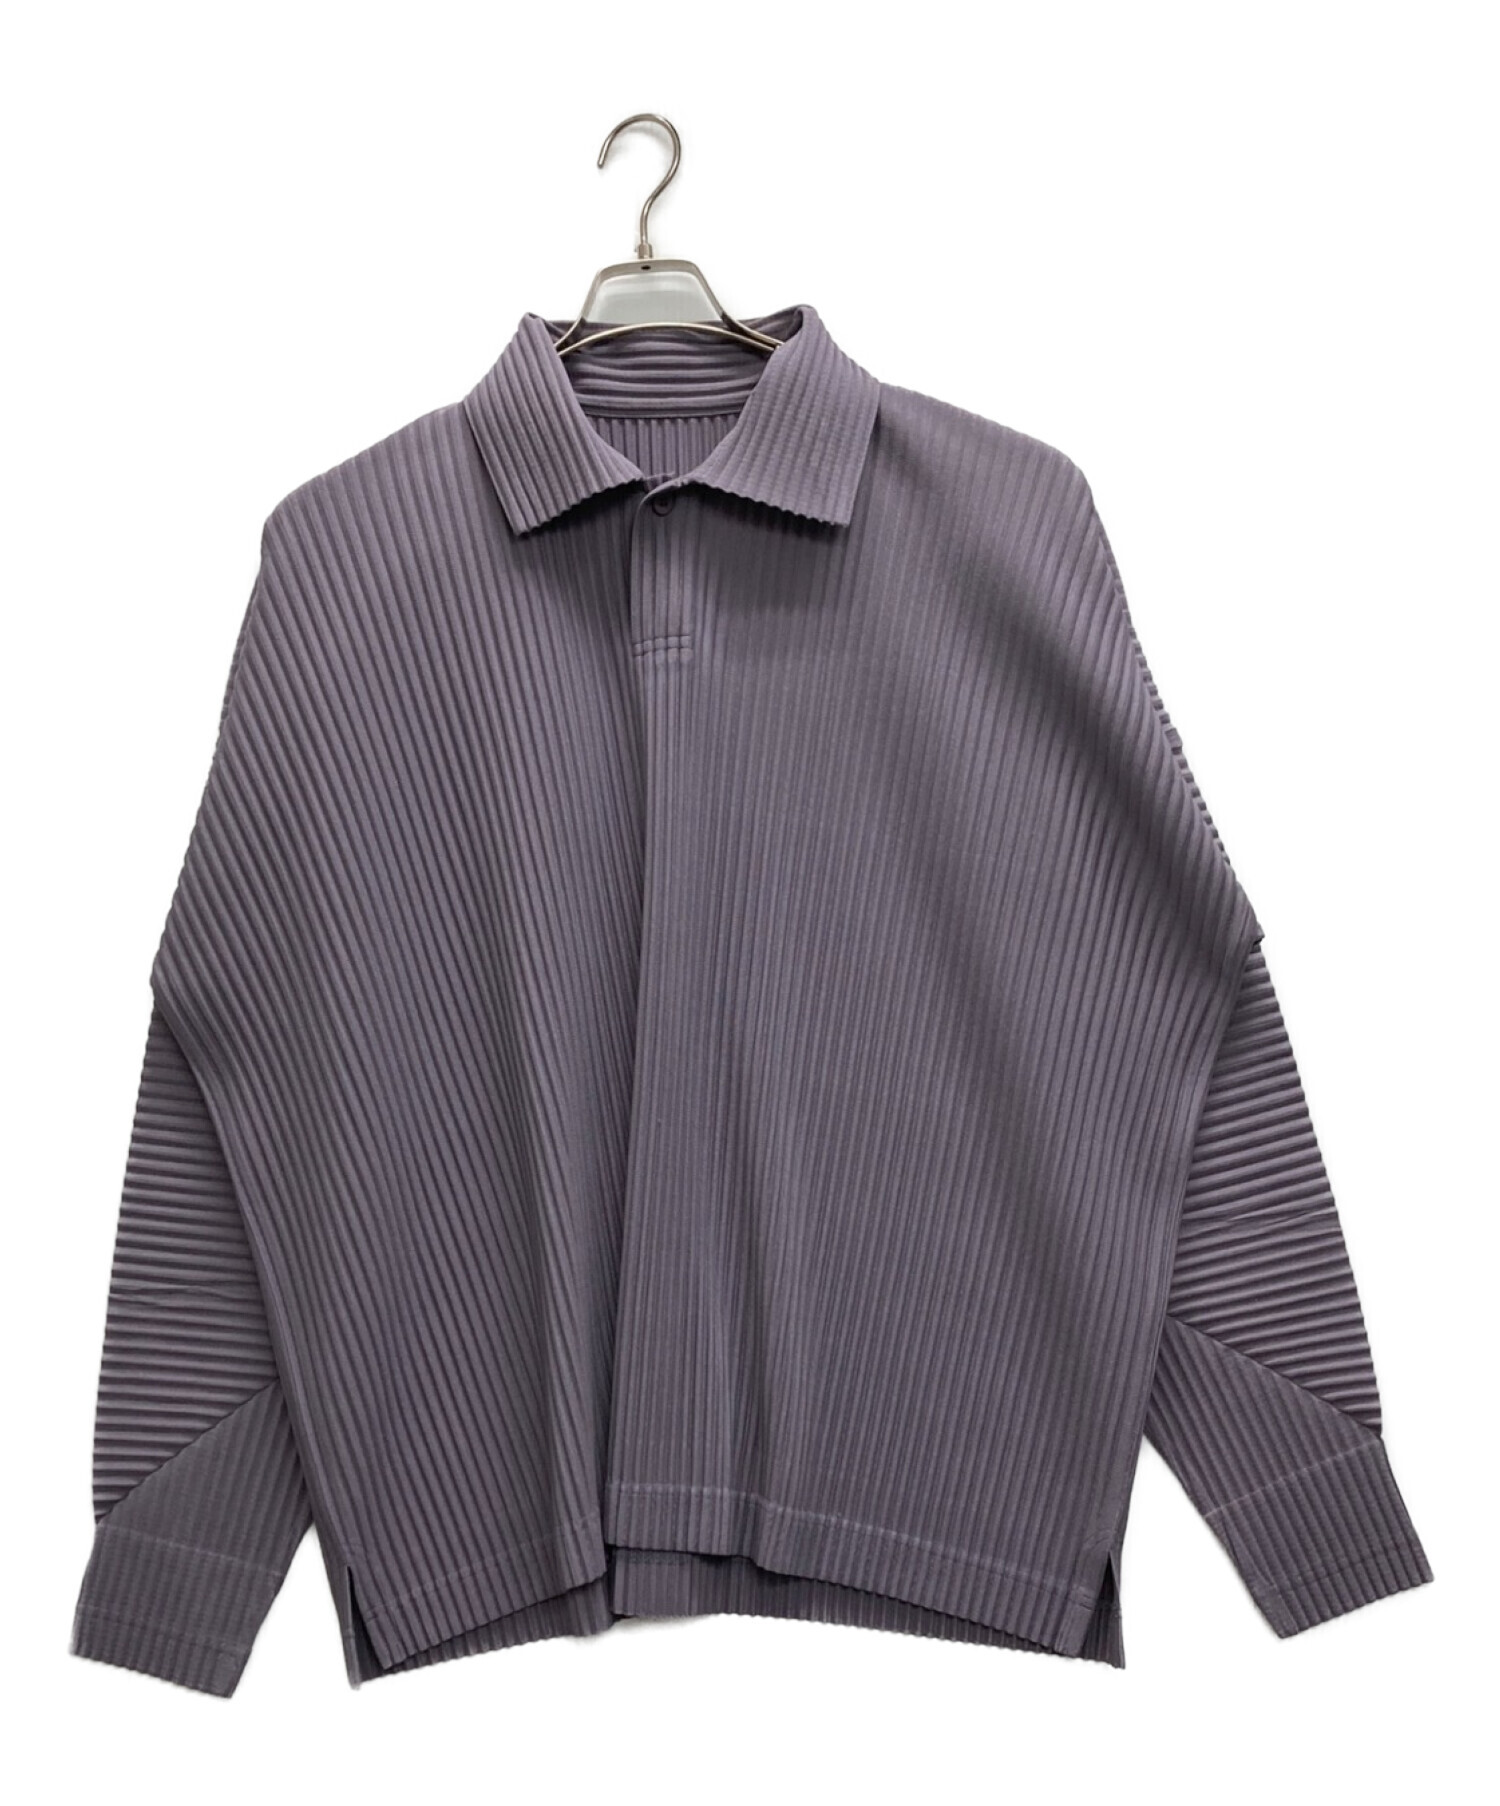 homme plisse issey miyake ポロシャツ 2 グレー - beaconparenting.ie